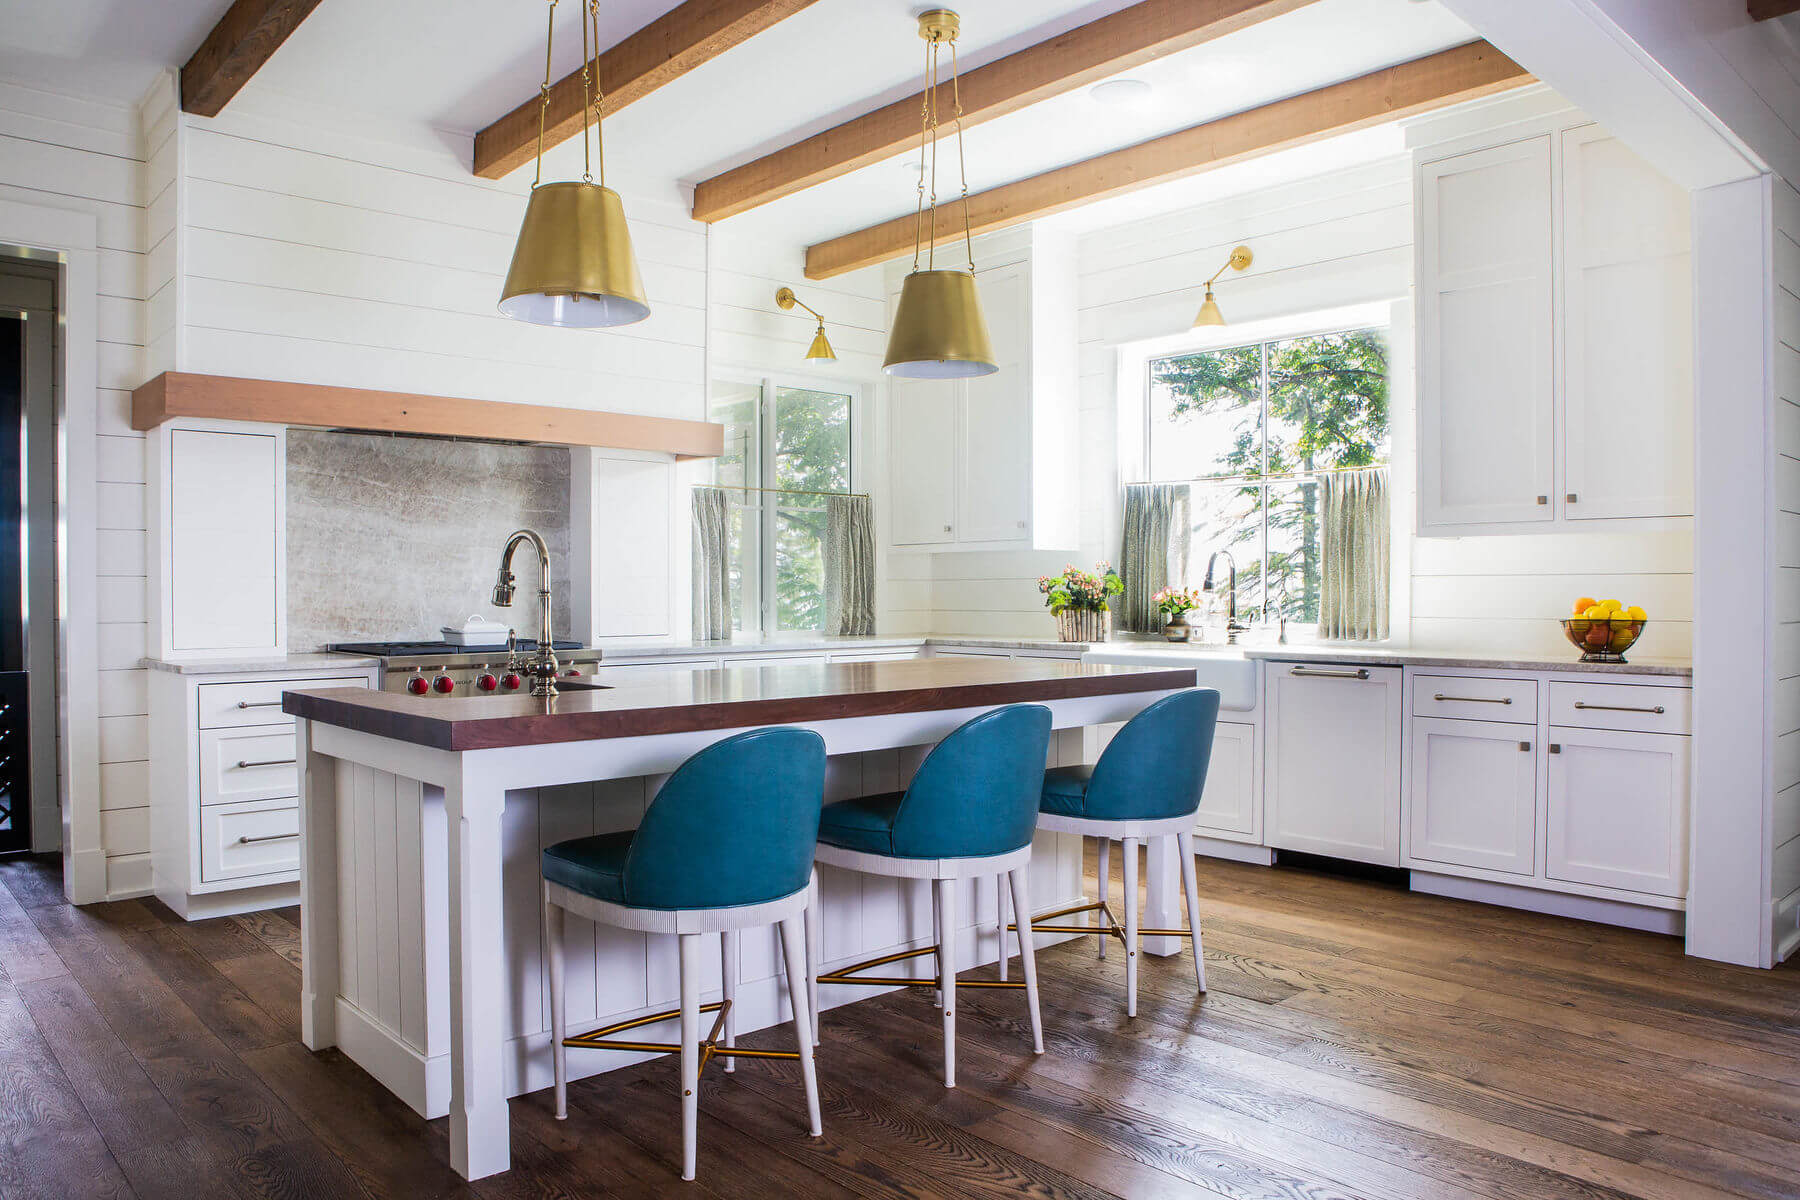 Dreamy Kitchens Memphis Designers Share Their Favorites